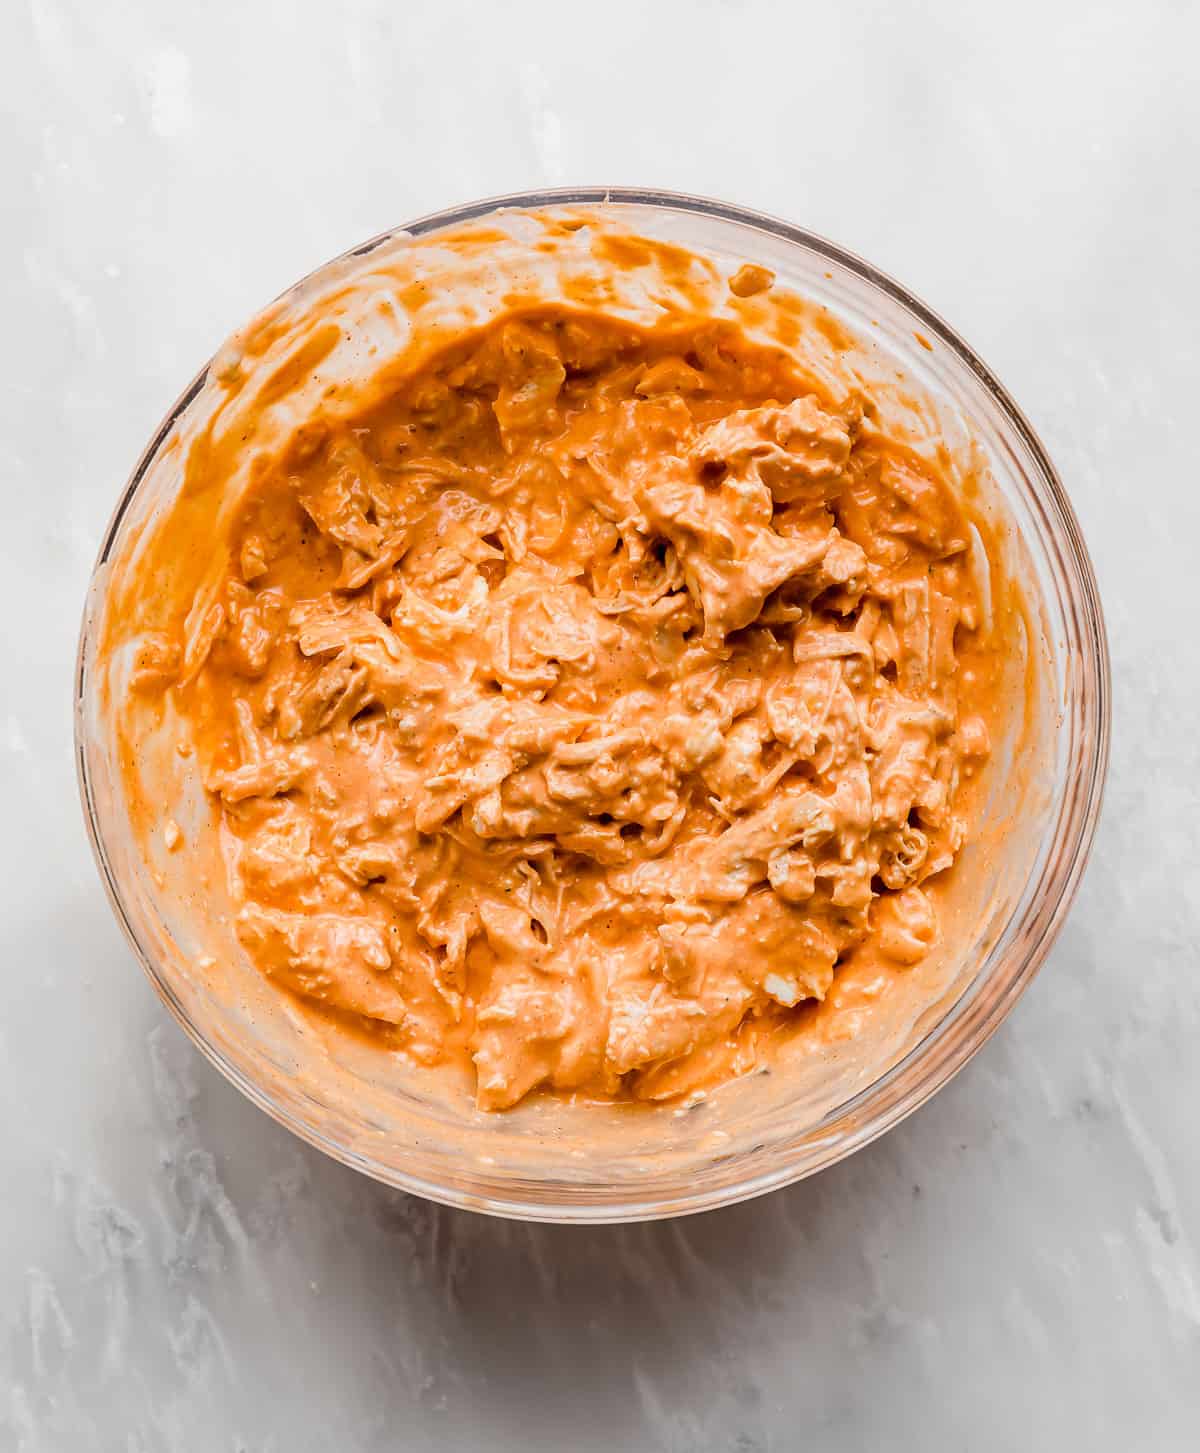 Bright orange Buffalo Chicken Dip mixture in a glass bowl on a white marble background.